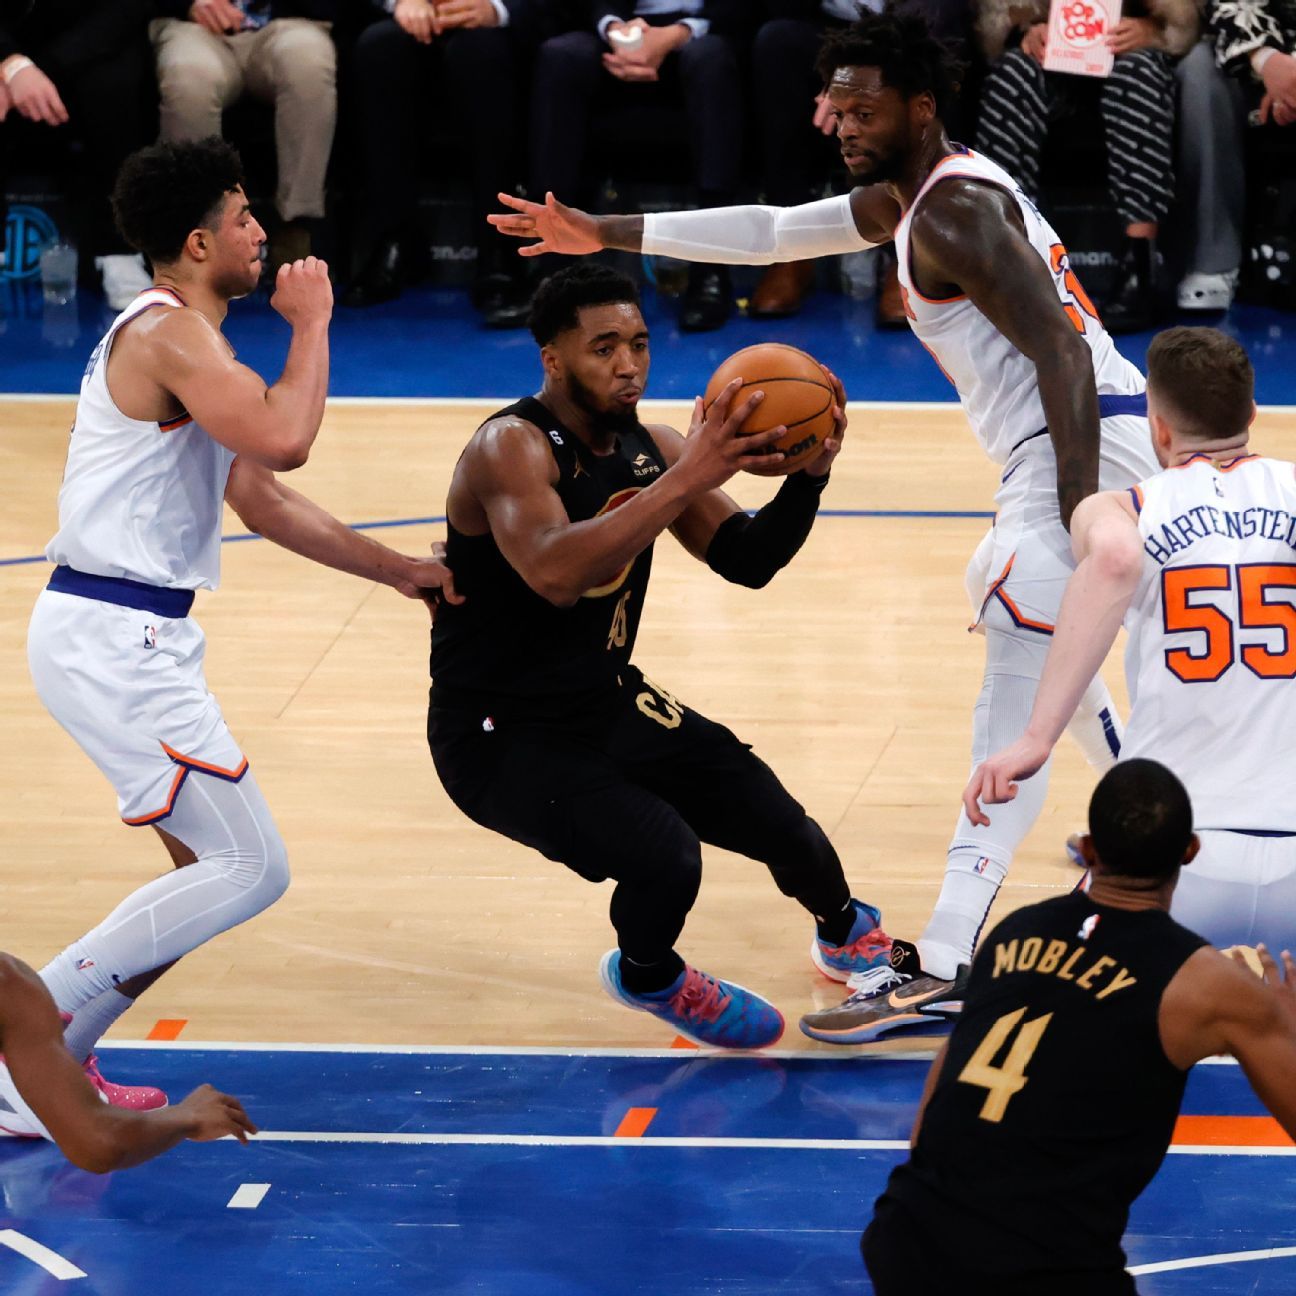 Groin injury, turnovers haunt Cavs’ Mitchell in loss to Knicks